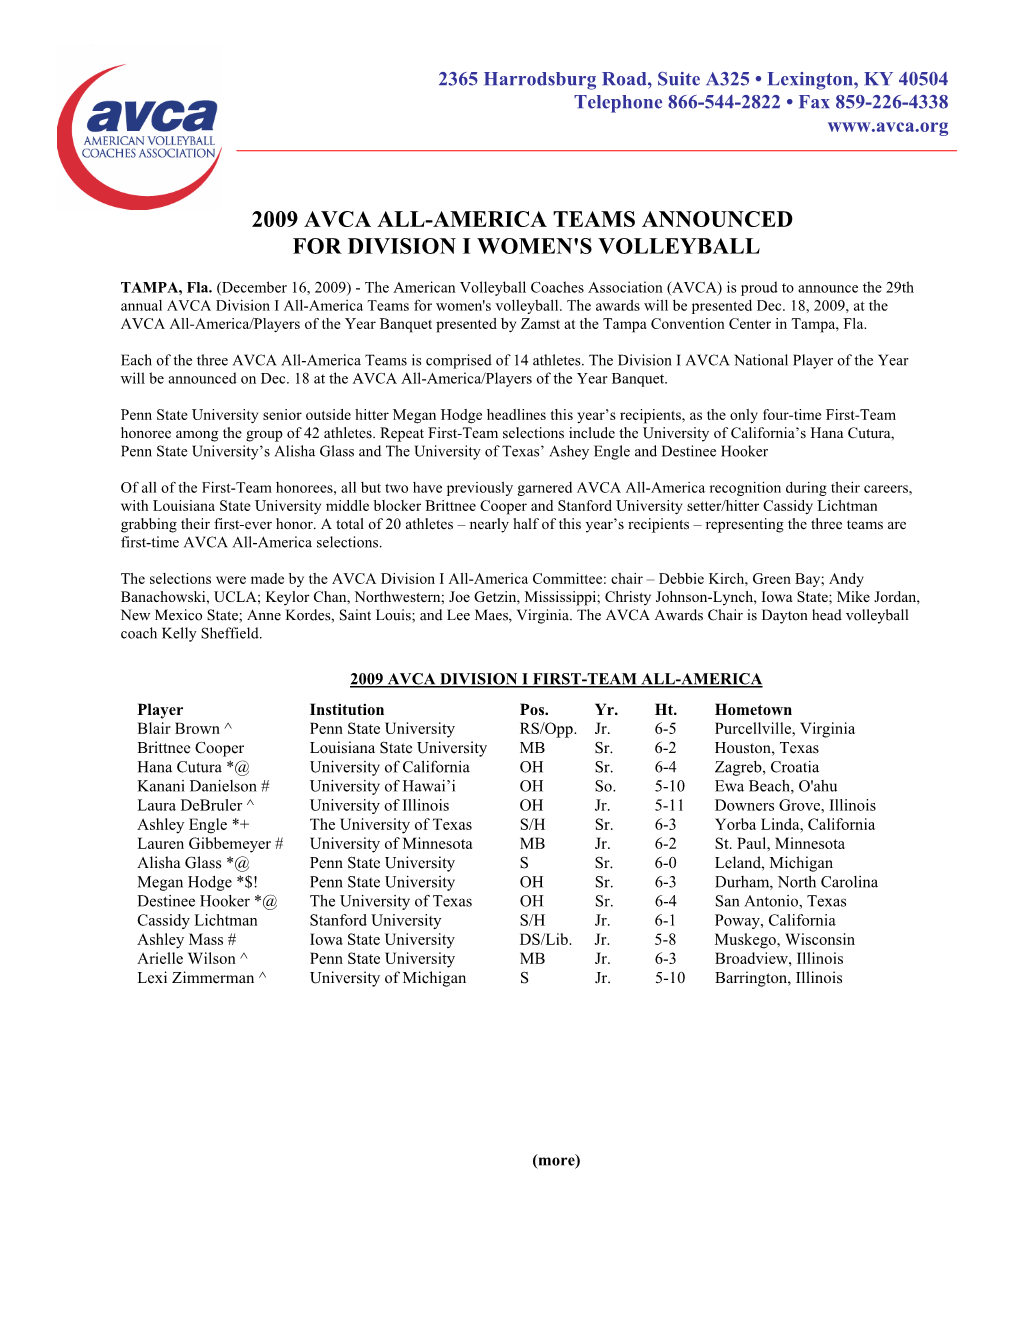 2009 Avca All-America Teams Announced for Division I Women's Volleyball